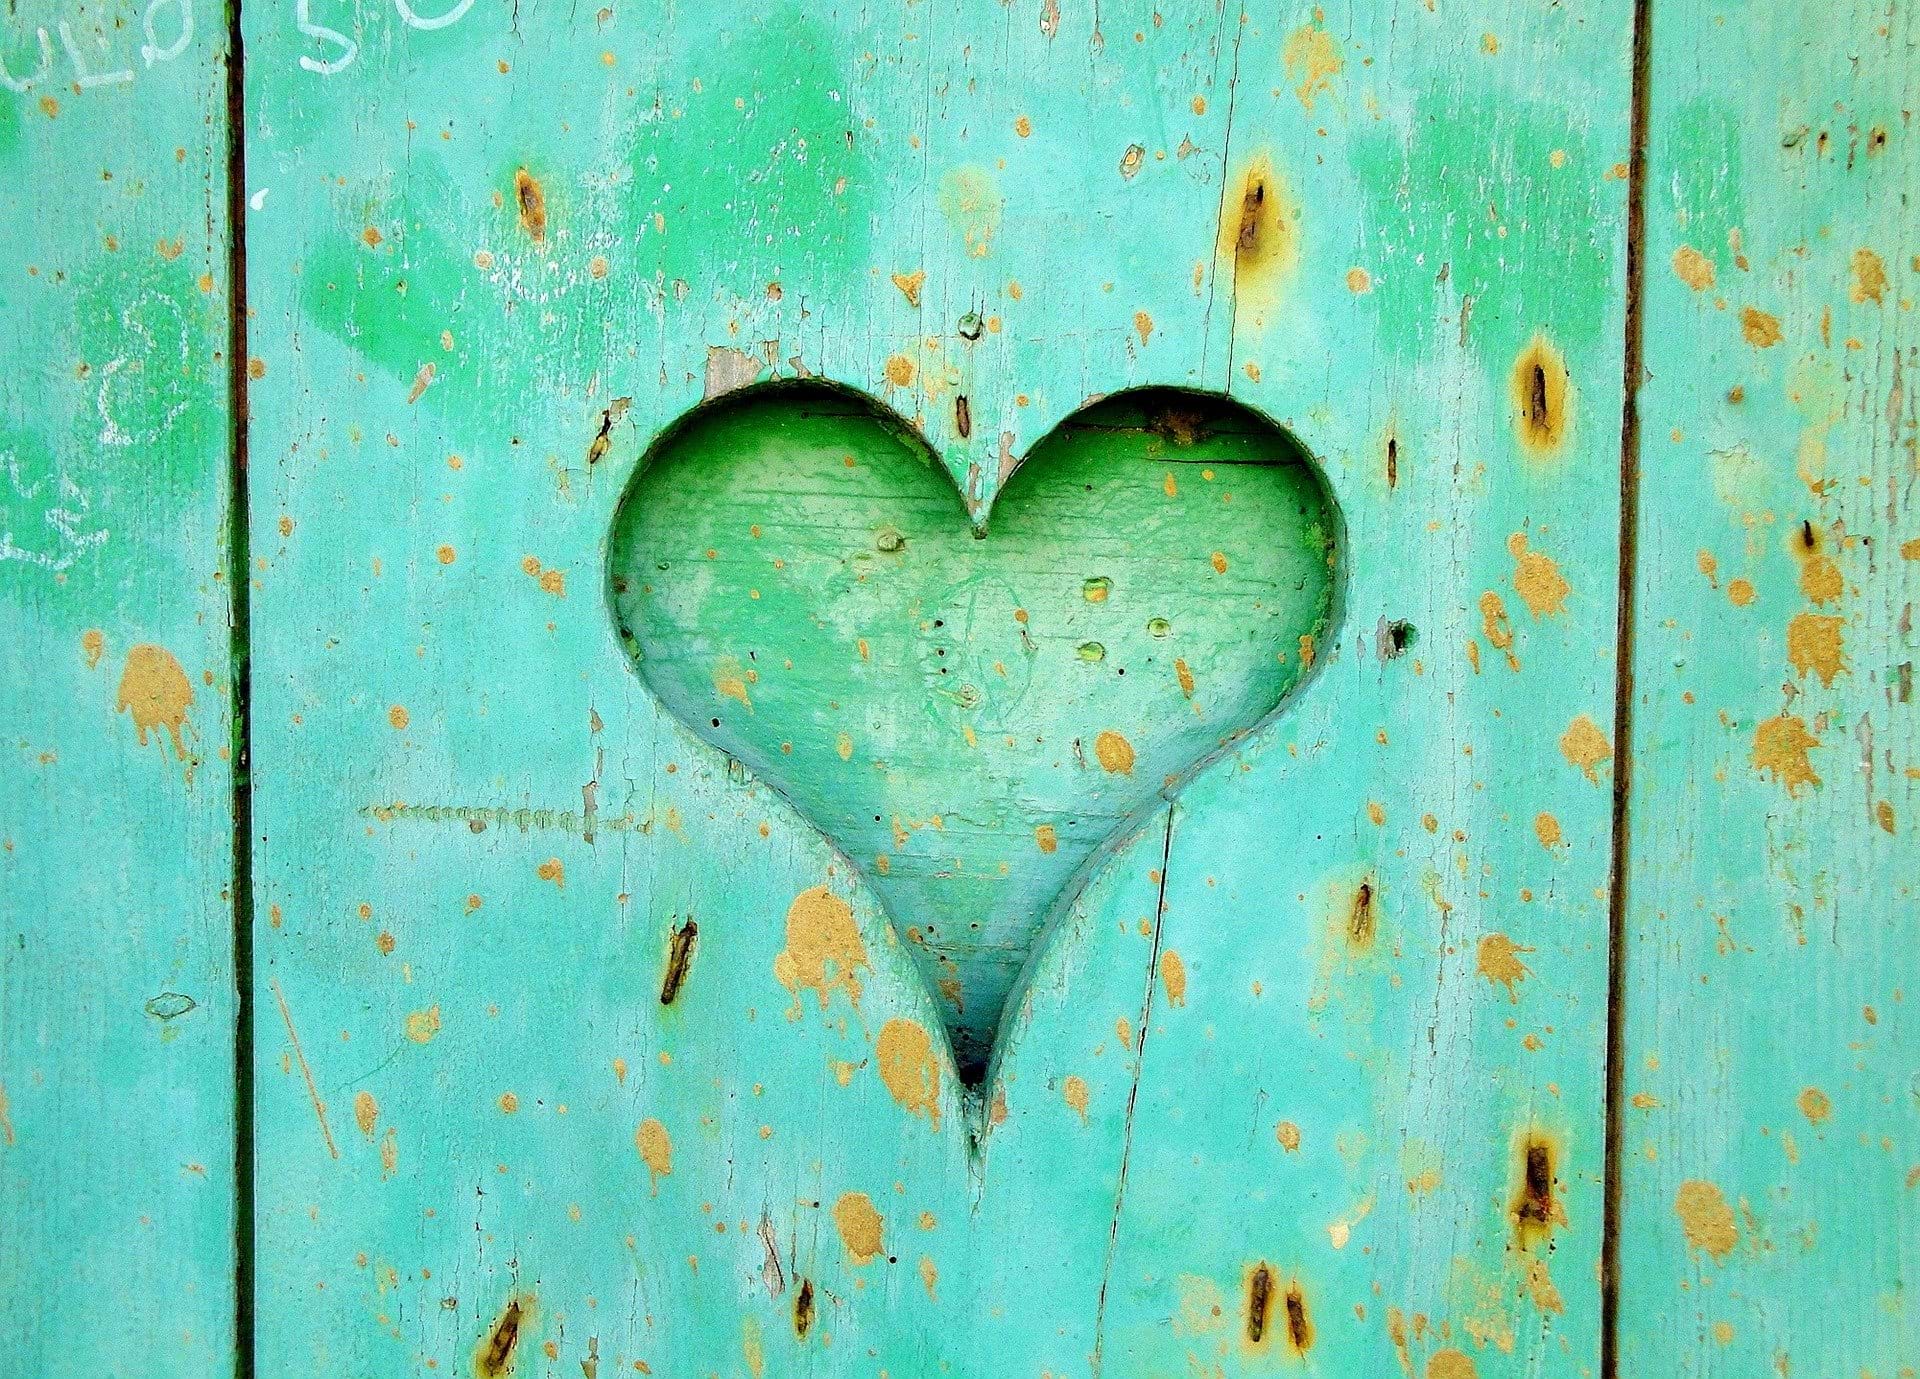 A green heart carved into wood